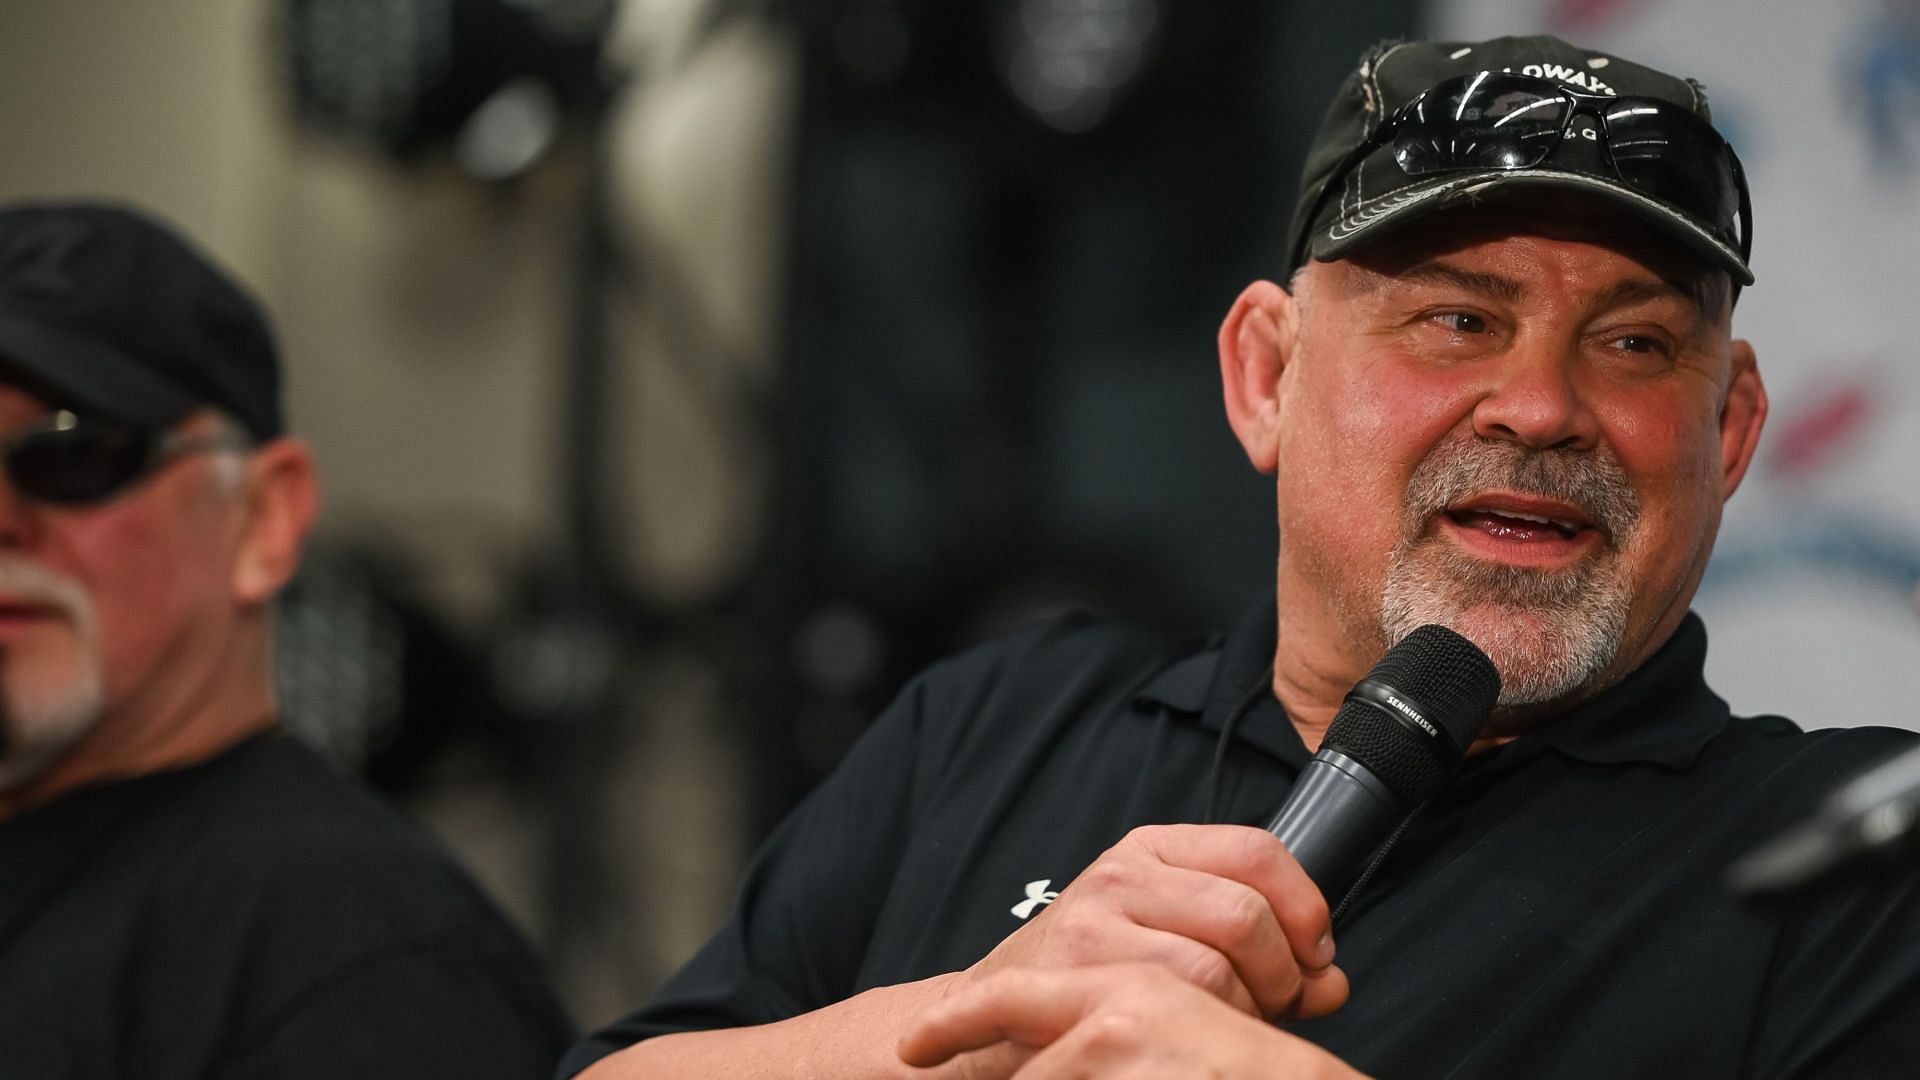 2022 WWE Hall of Fame inductee Rick Steiner